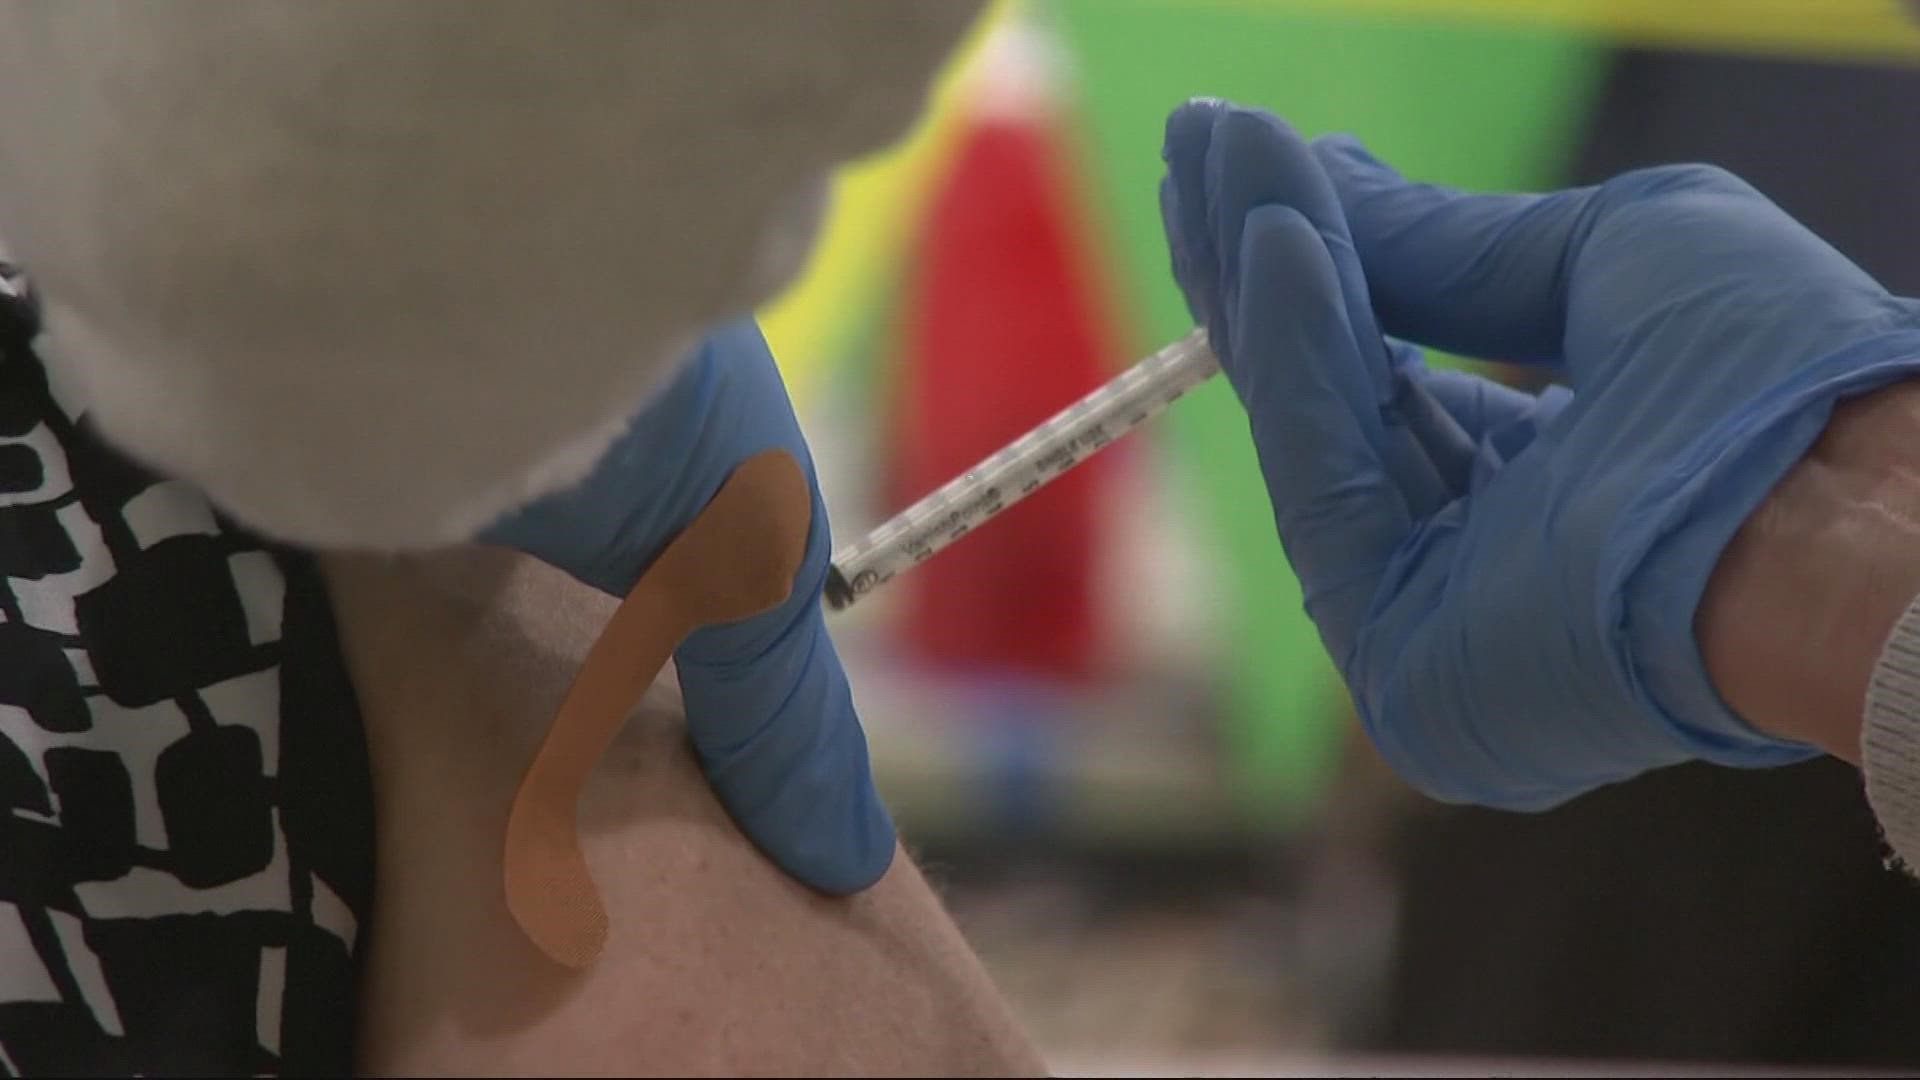 Doctors are recommending for people to double dip for fall vaccinations, both the COVID booster and the flu vaccine.